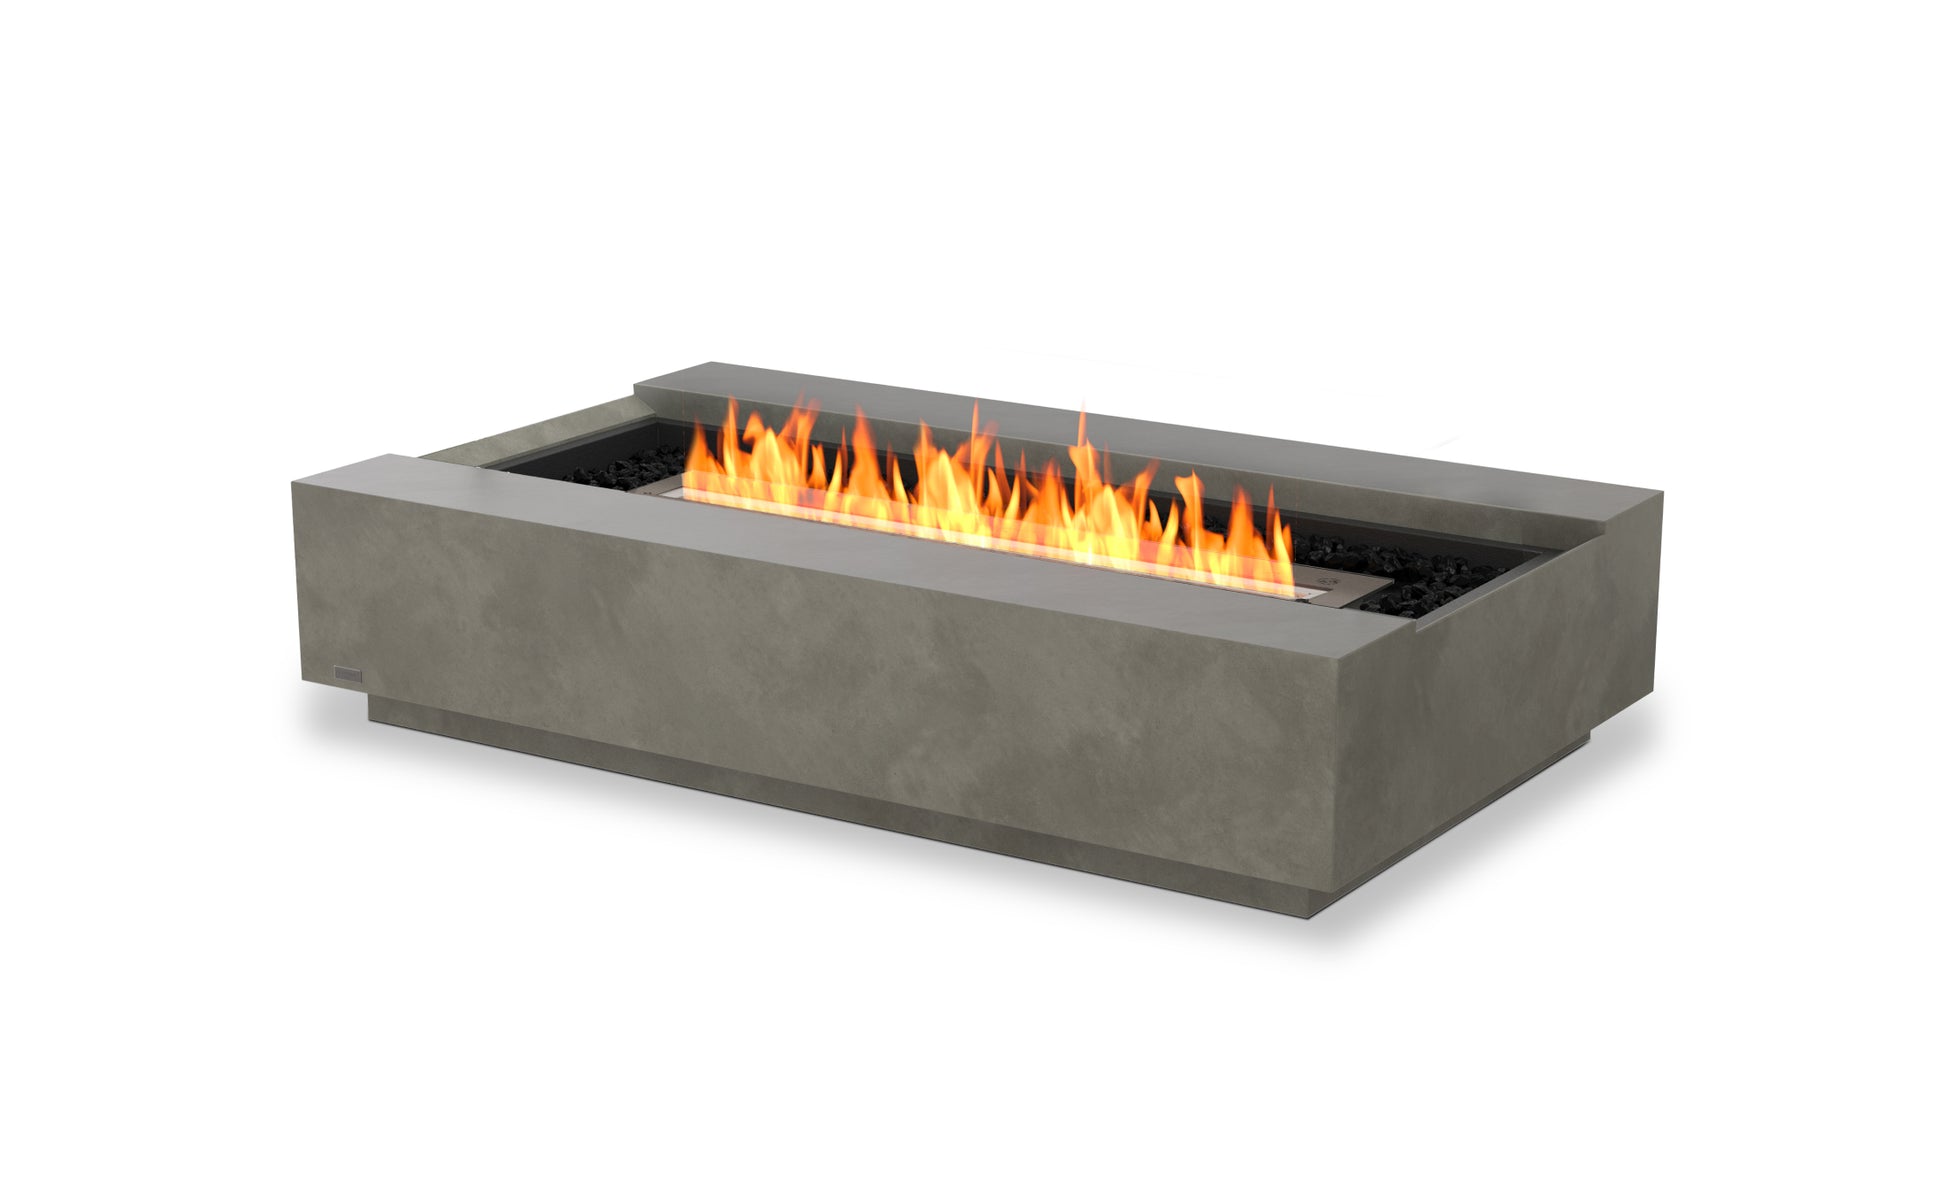 EcoSmart Fire Cosmo 50 Fire Pit Table with Bioethanol Sustainable Fuel - PadioLiving - EcoSmart Fire Cosmo 50 Fire Pit Table with Bioethanol Sustainable Fuel - Fire Pit - PadioLiving